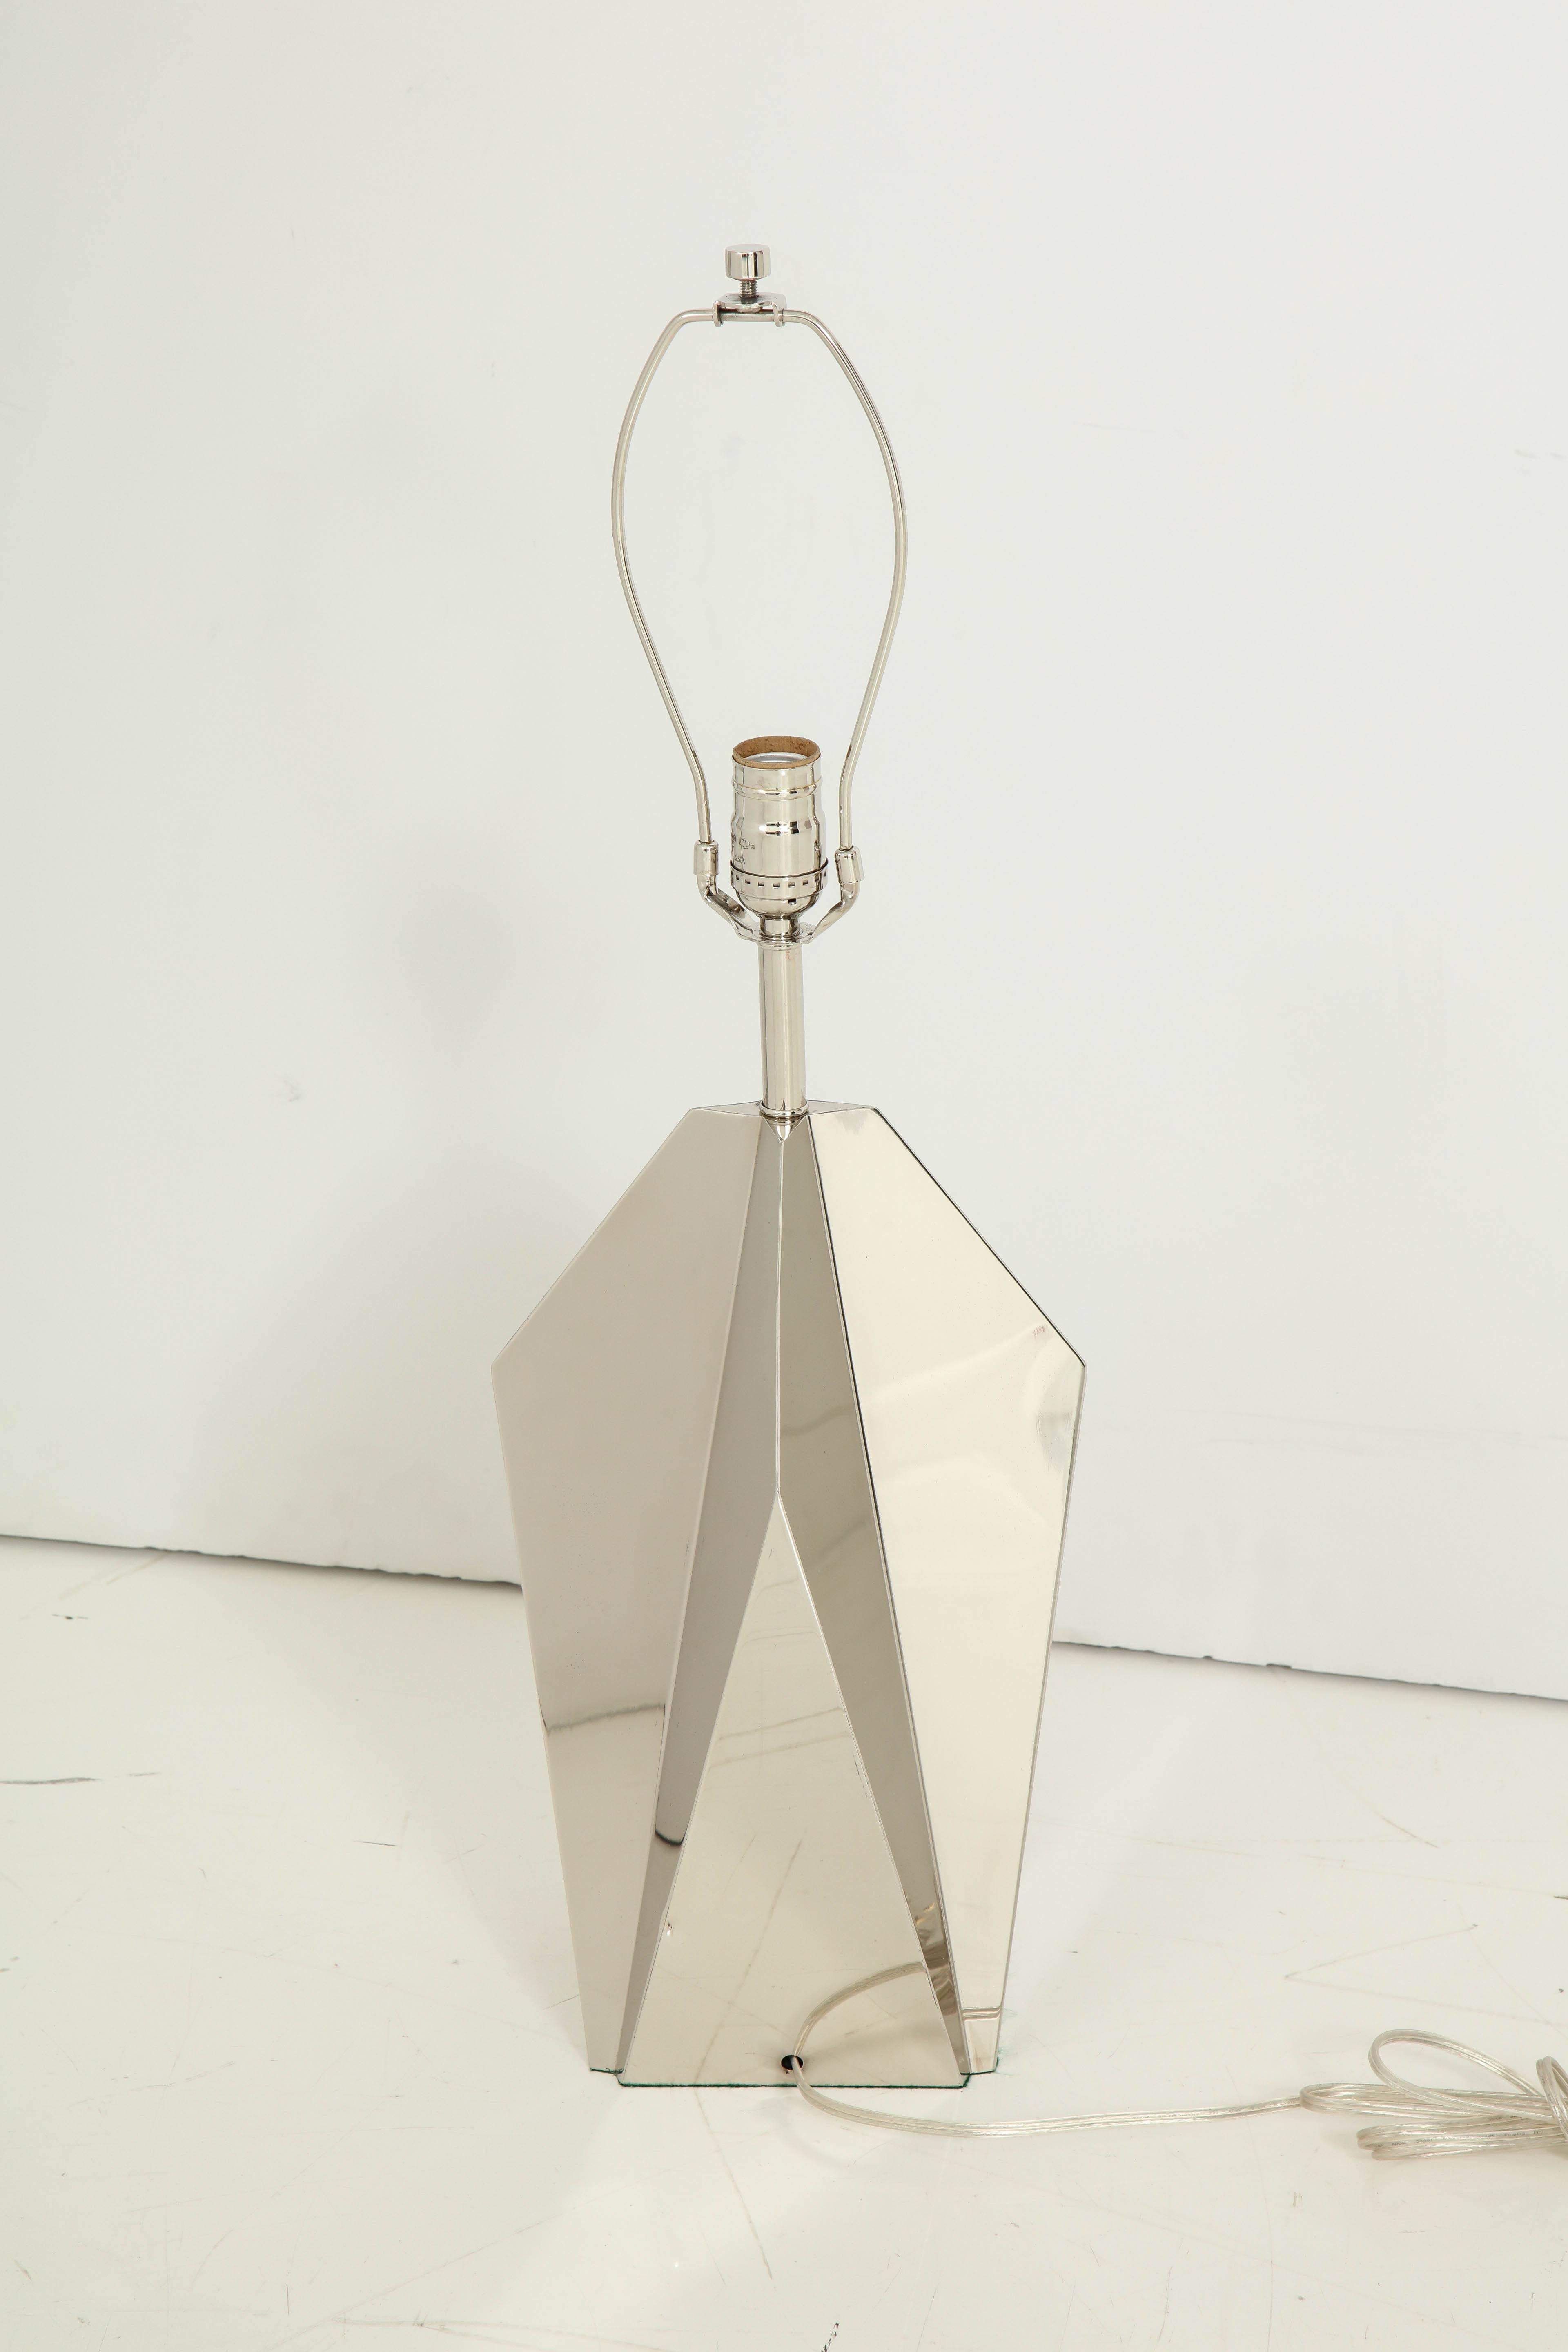 Nickel Jere, Origami, Chrome Lamps, 1970